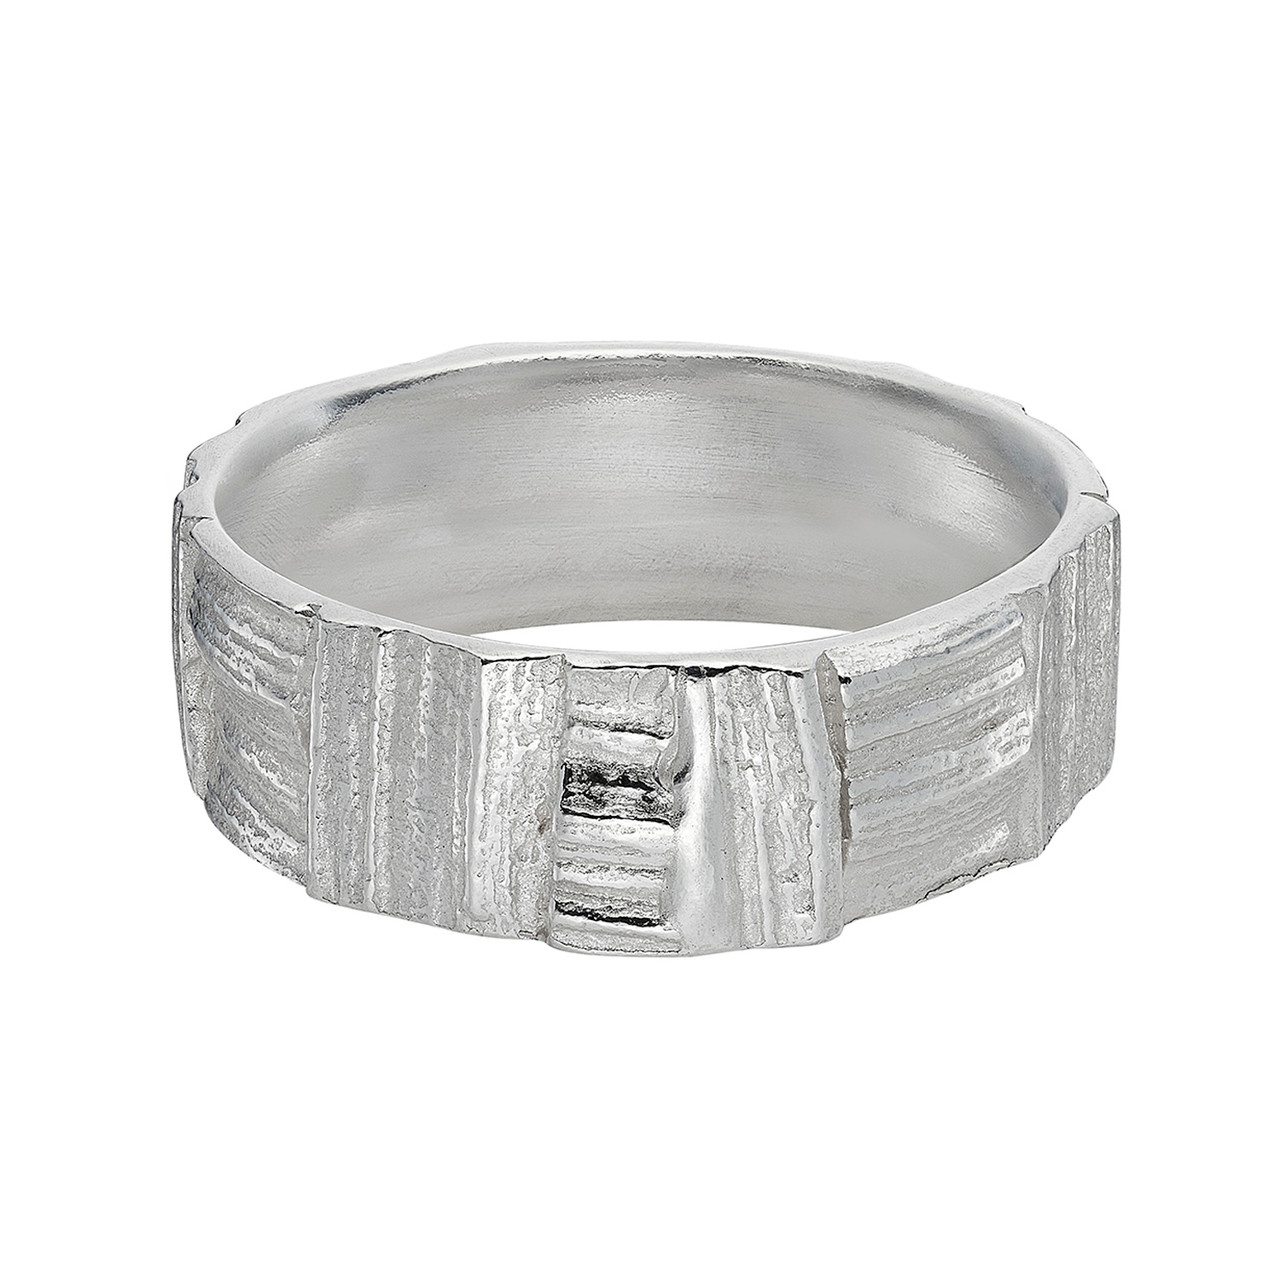 Patchwork Oak Ring Silver, Issy White, tomfoolery